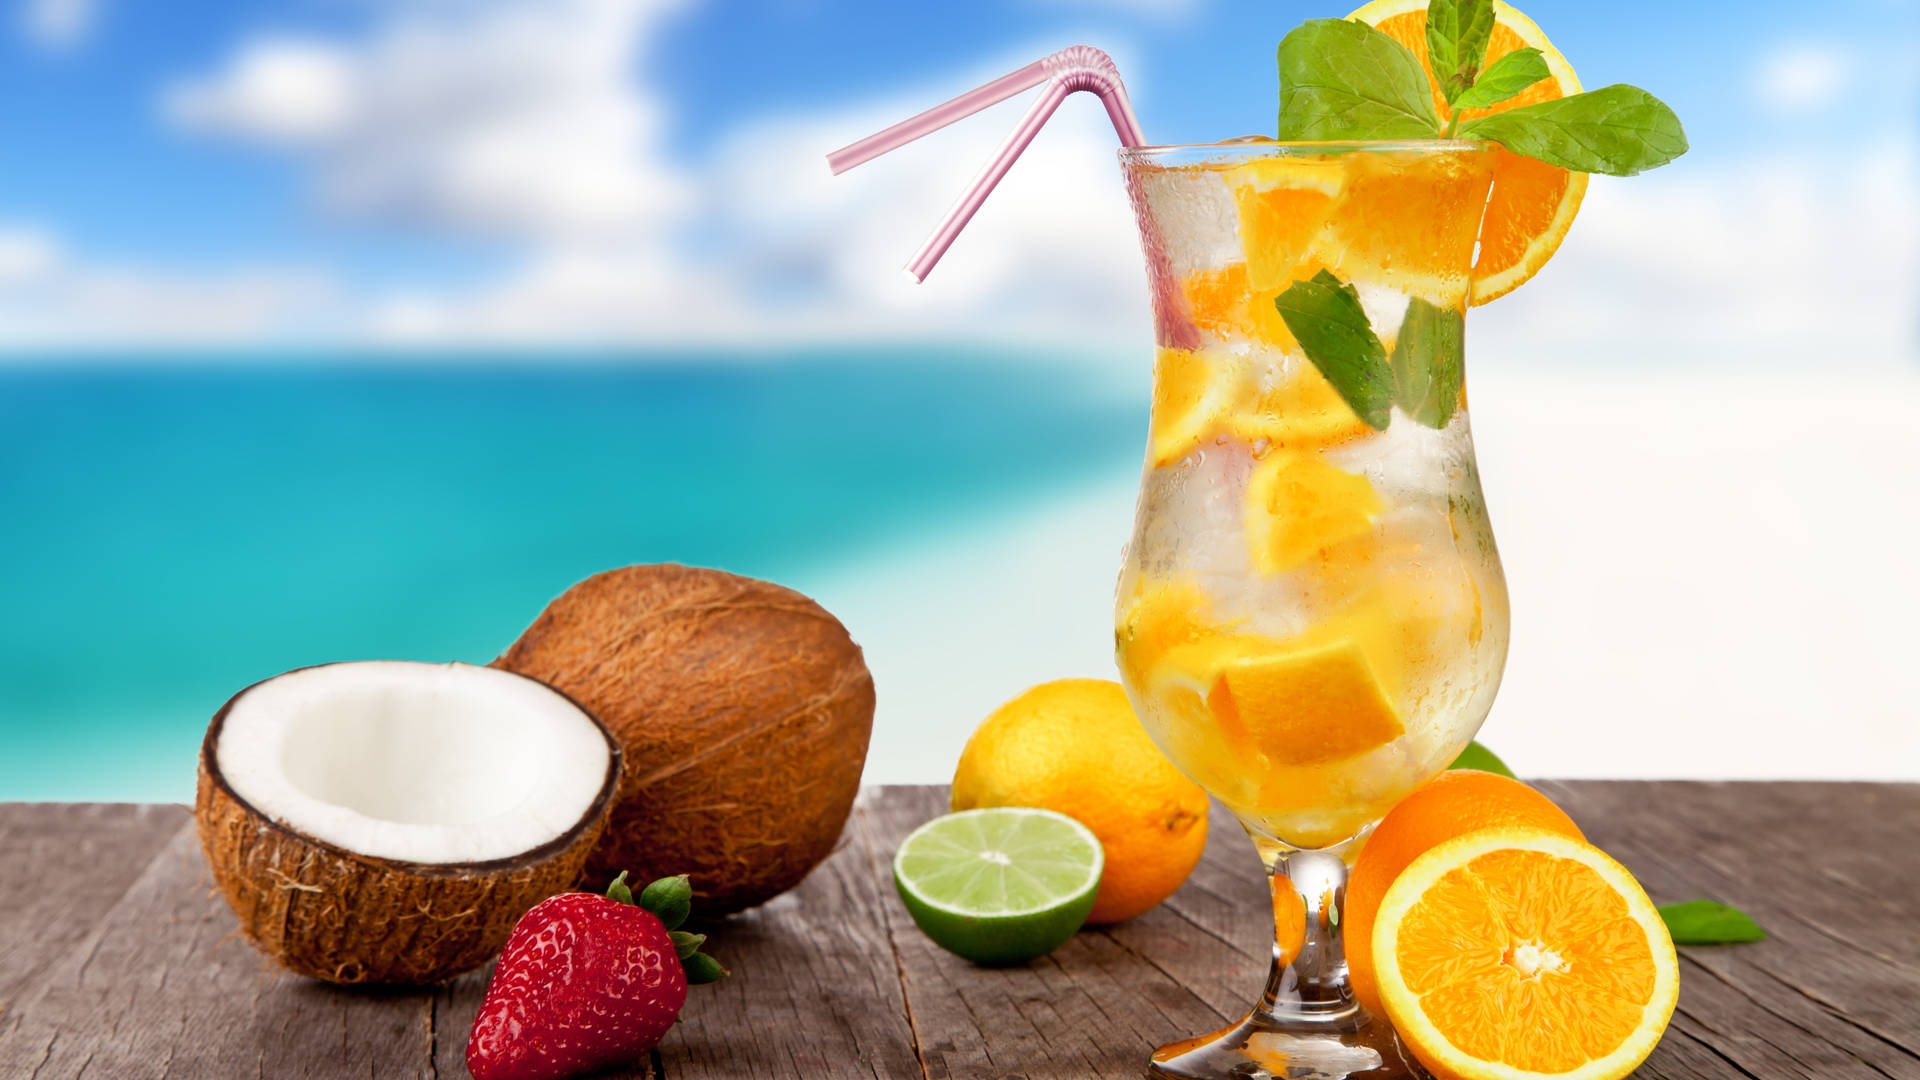 Orange And Lime Tropical Drink Background